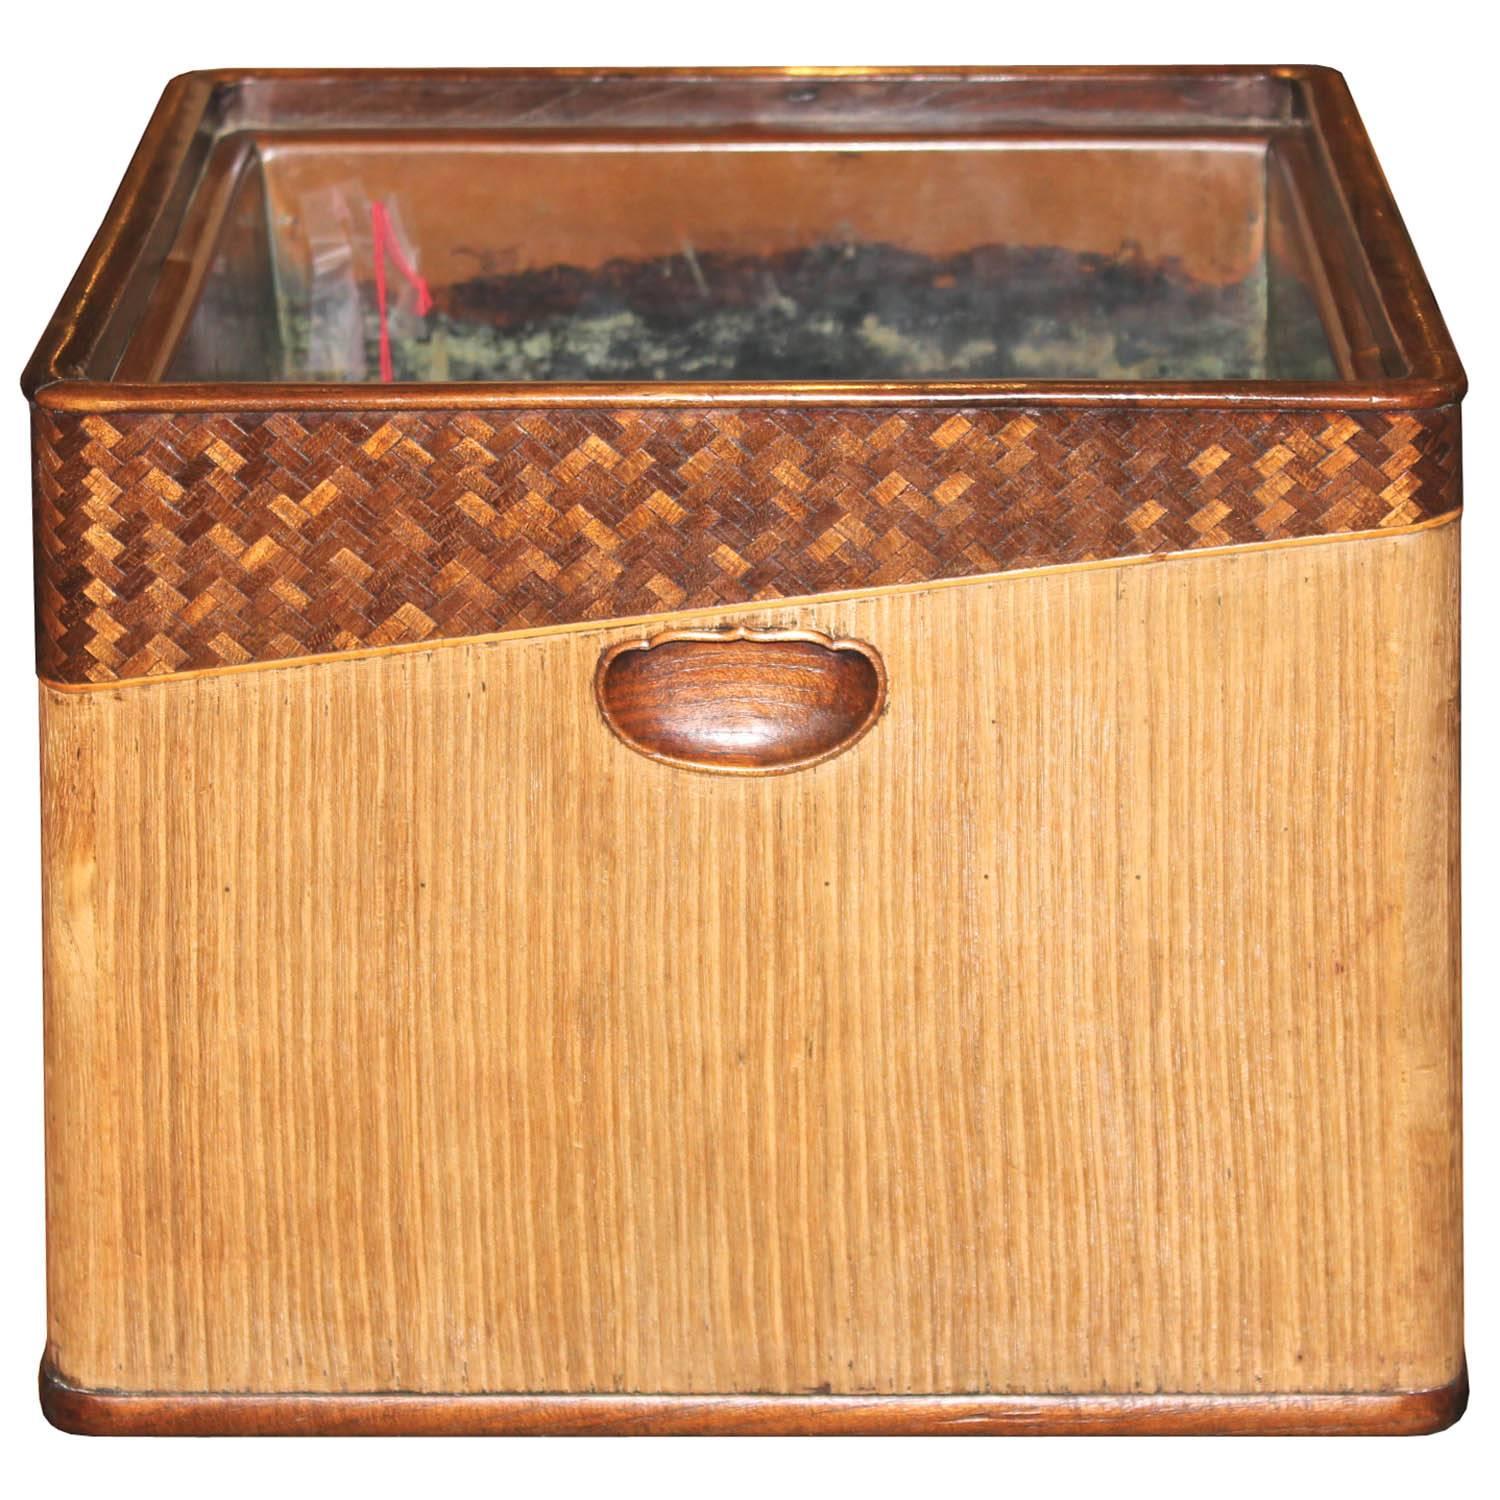 Elegant square kiriwood hibachi (handwarmer) with handwoven bamboo and mulberry wood burl on top and lined with copper from Kyoto, Japan. Hibachi was originally used to warm hands in cold rooms because there was no central heating in Japan. Perfect